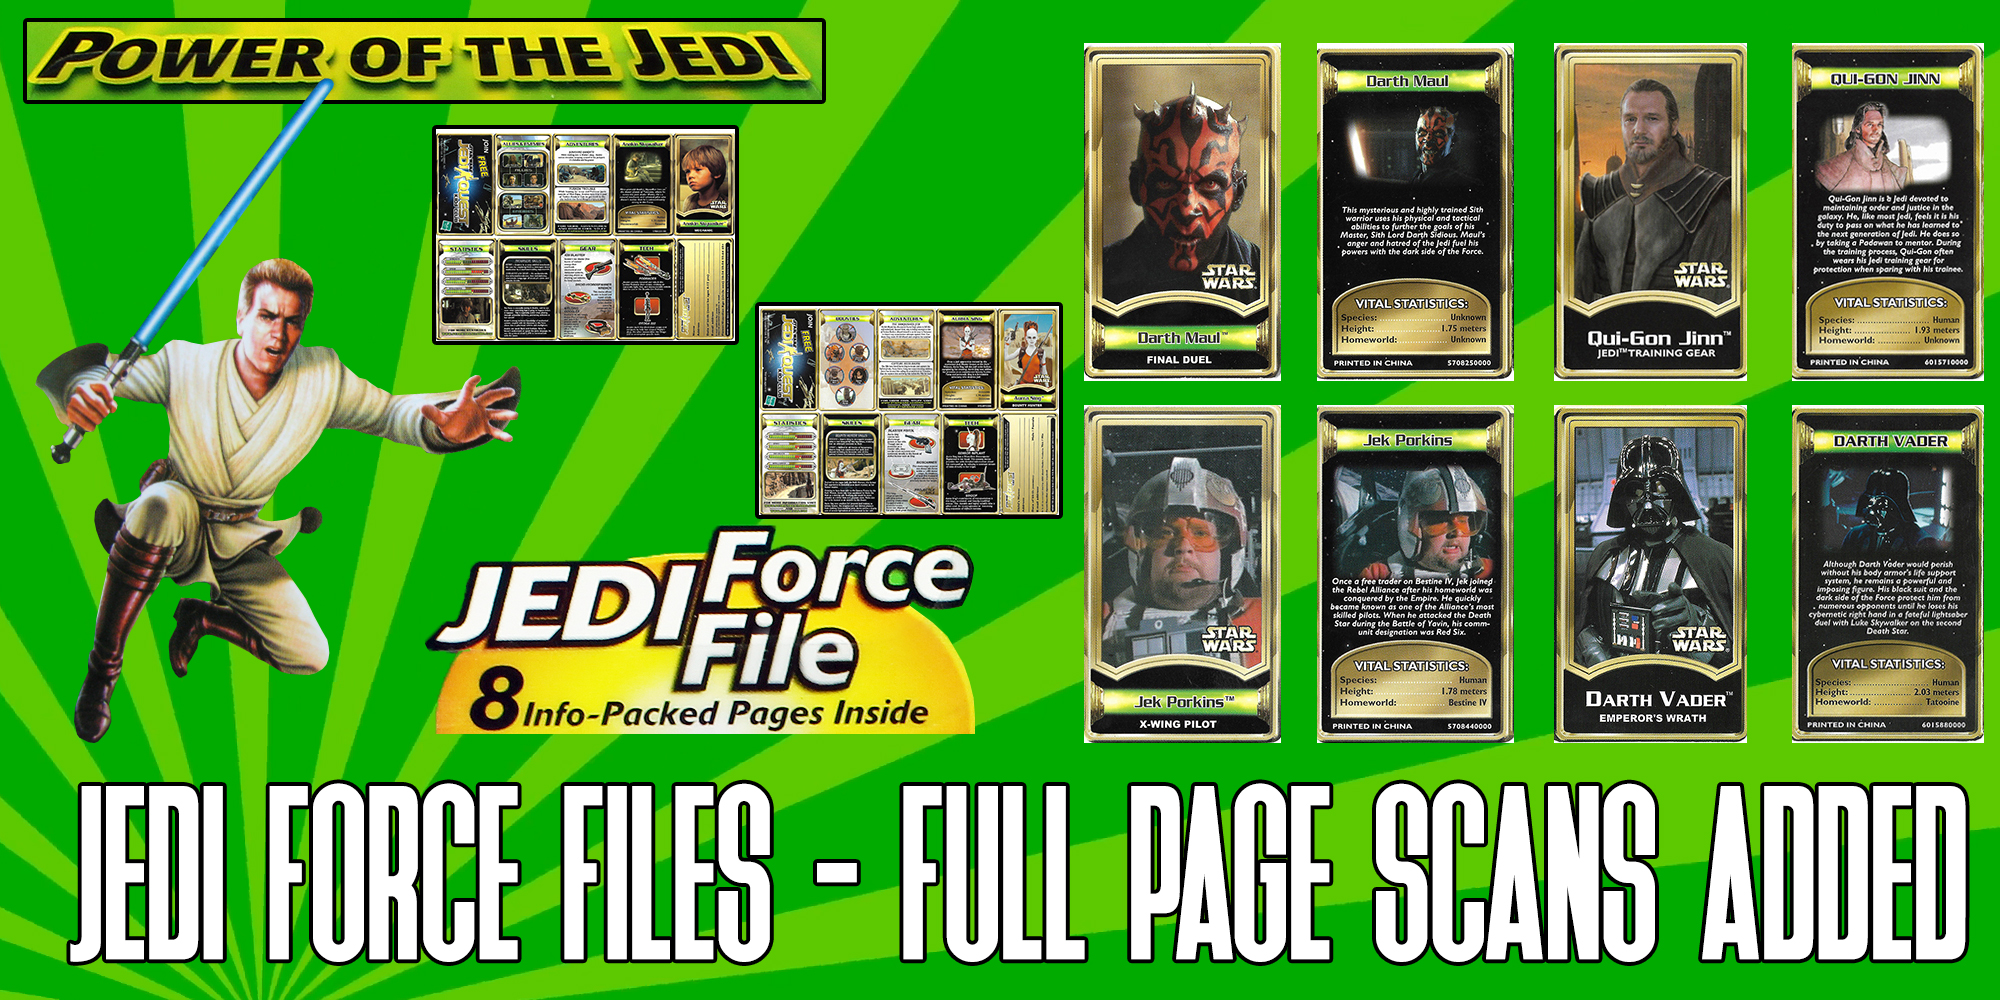 Power Of The Jedi Force Files Added